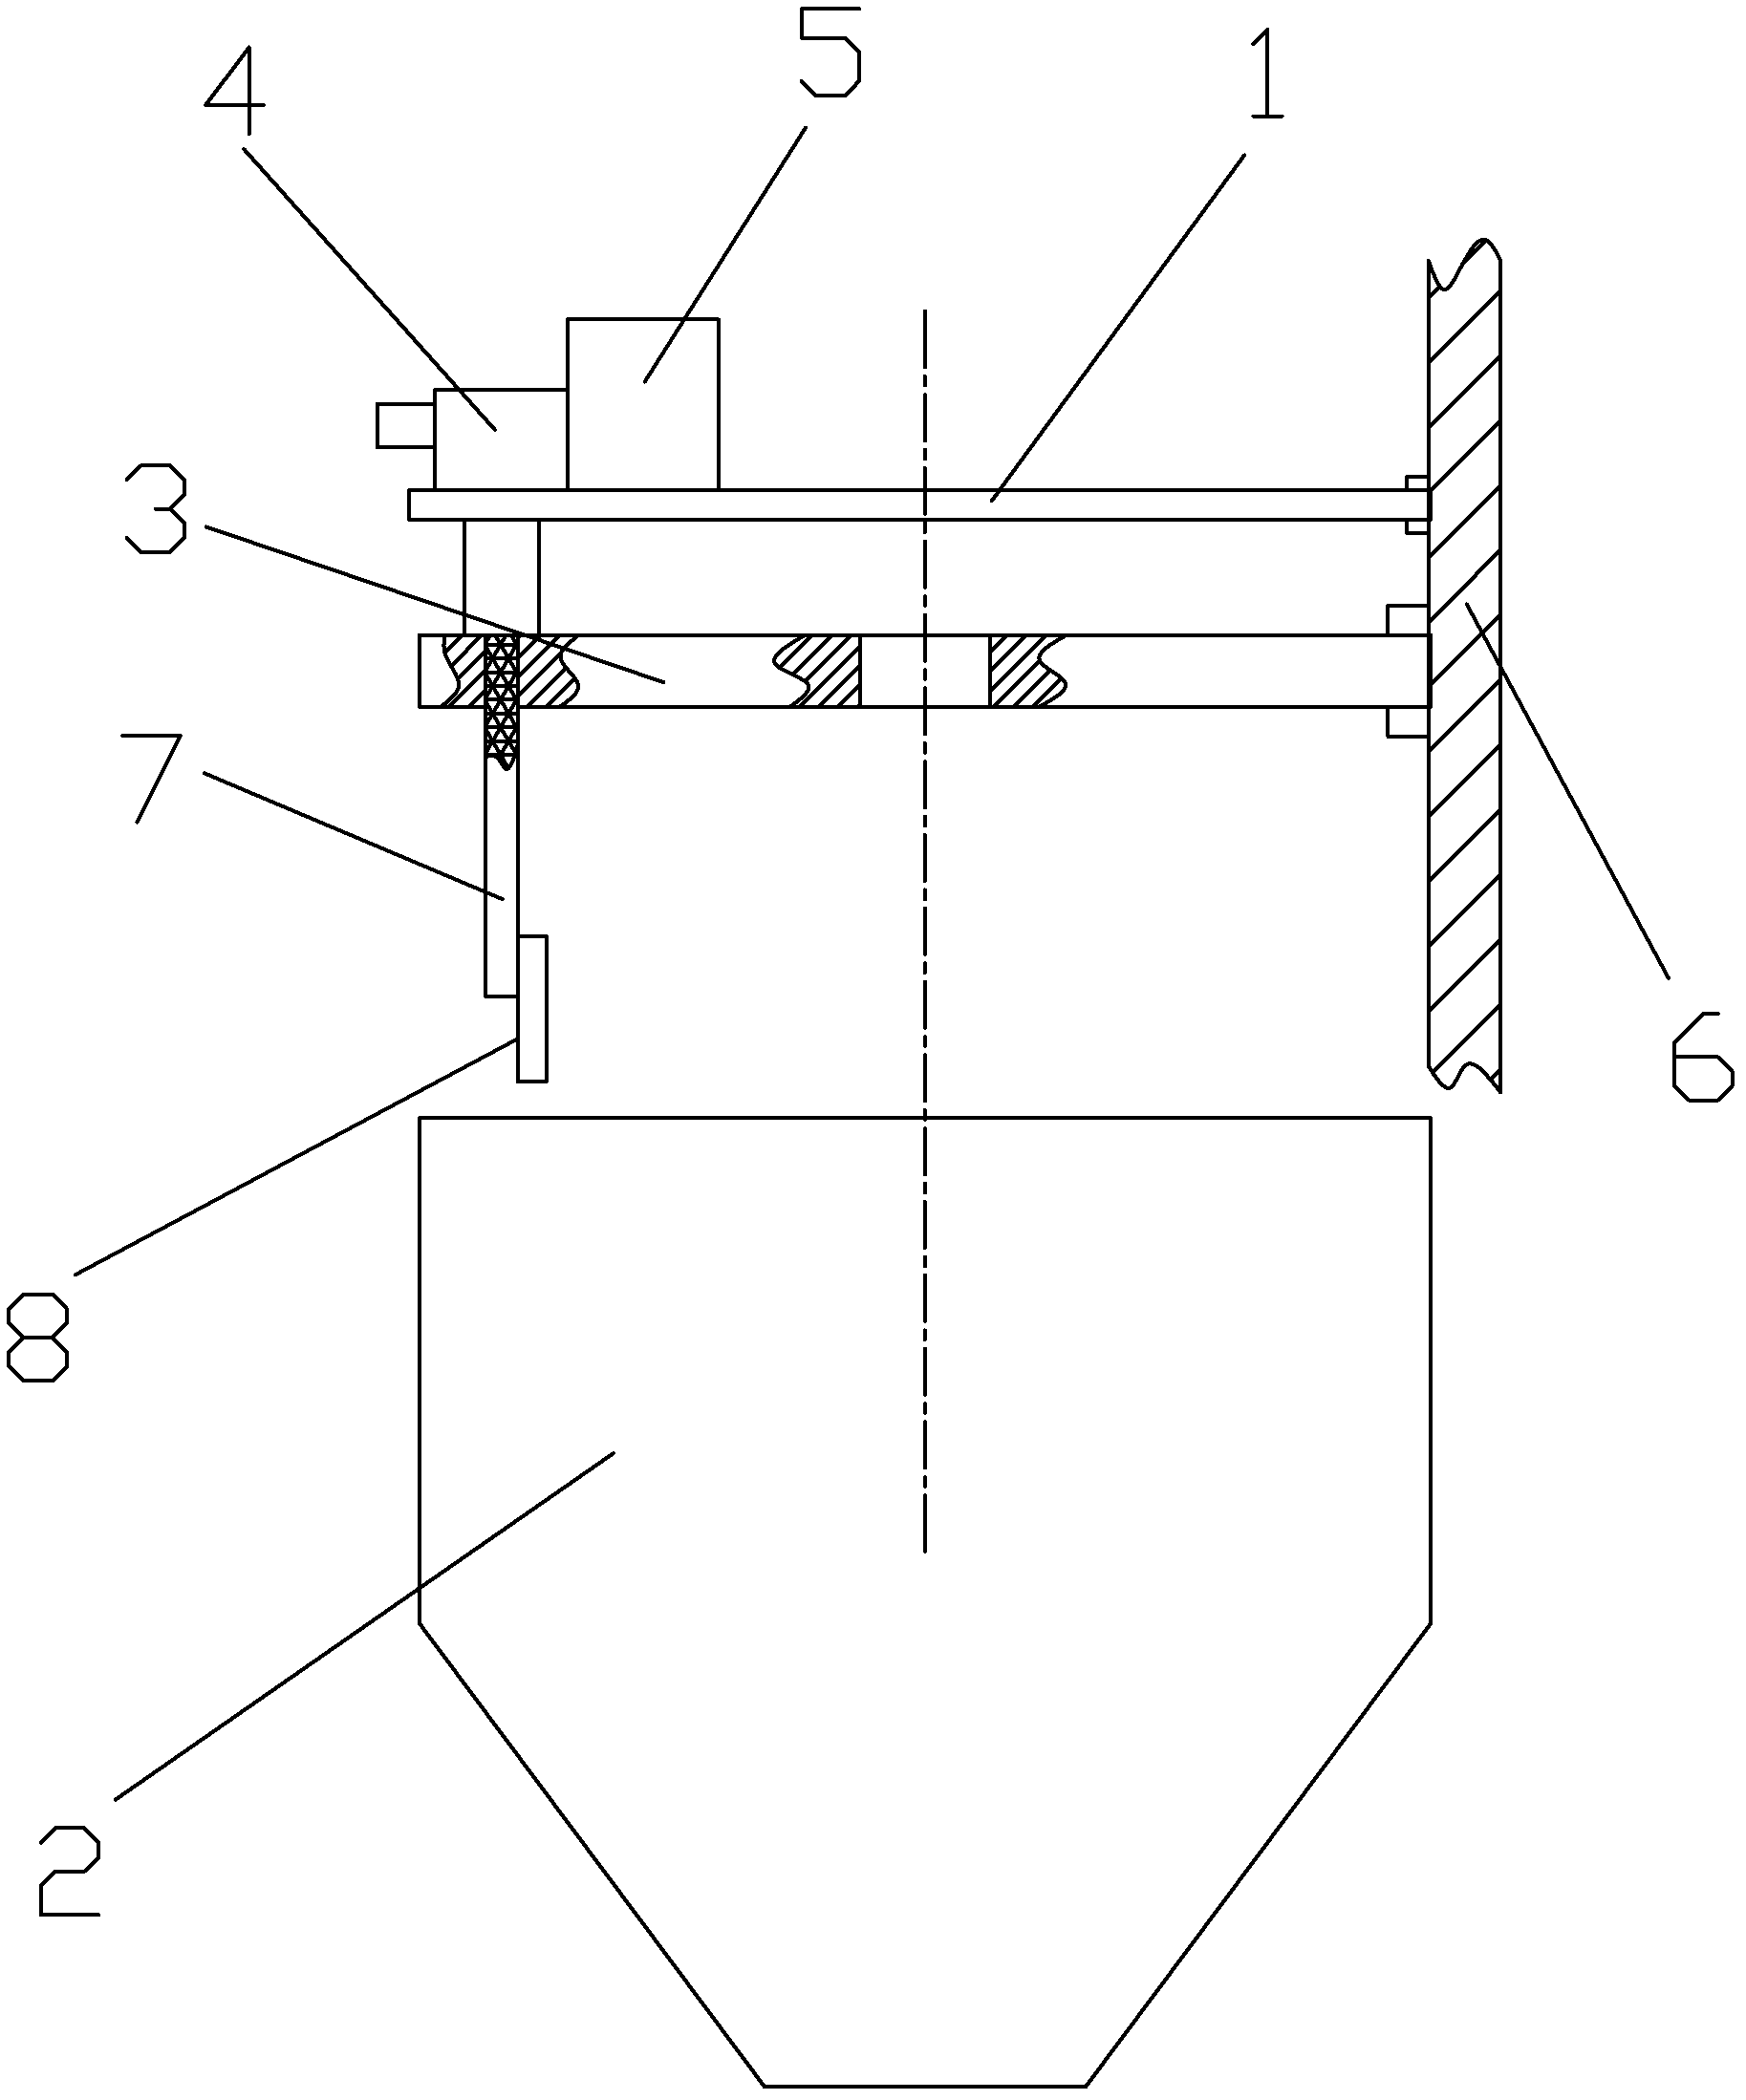 Non-contact temperature measuring device for monitoring of production process of quartz crucible